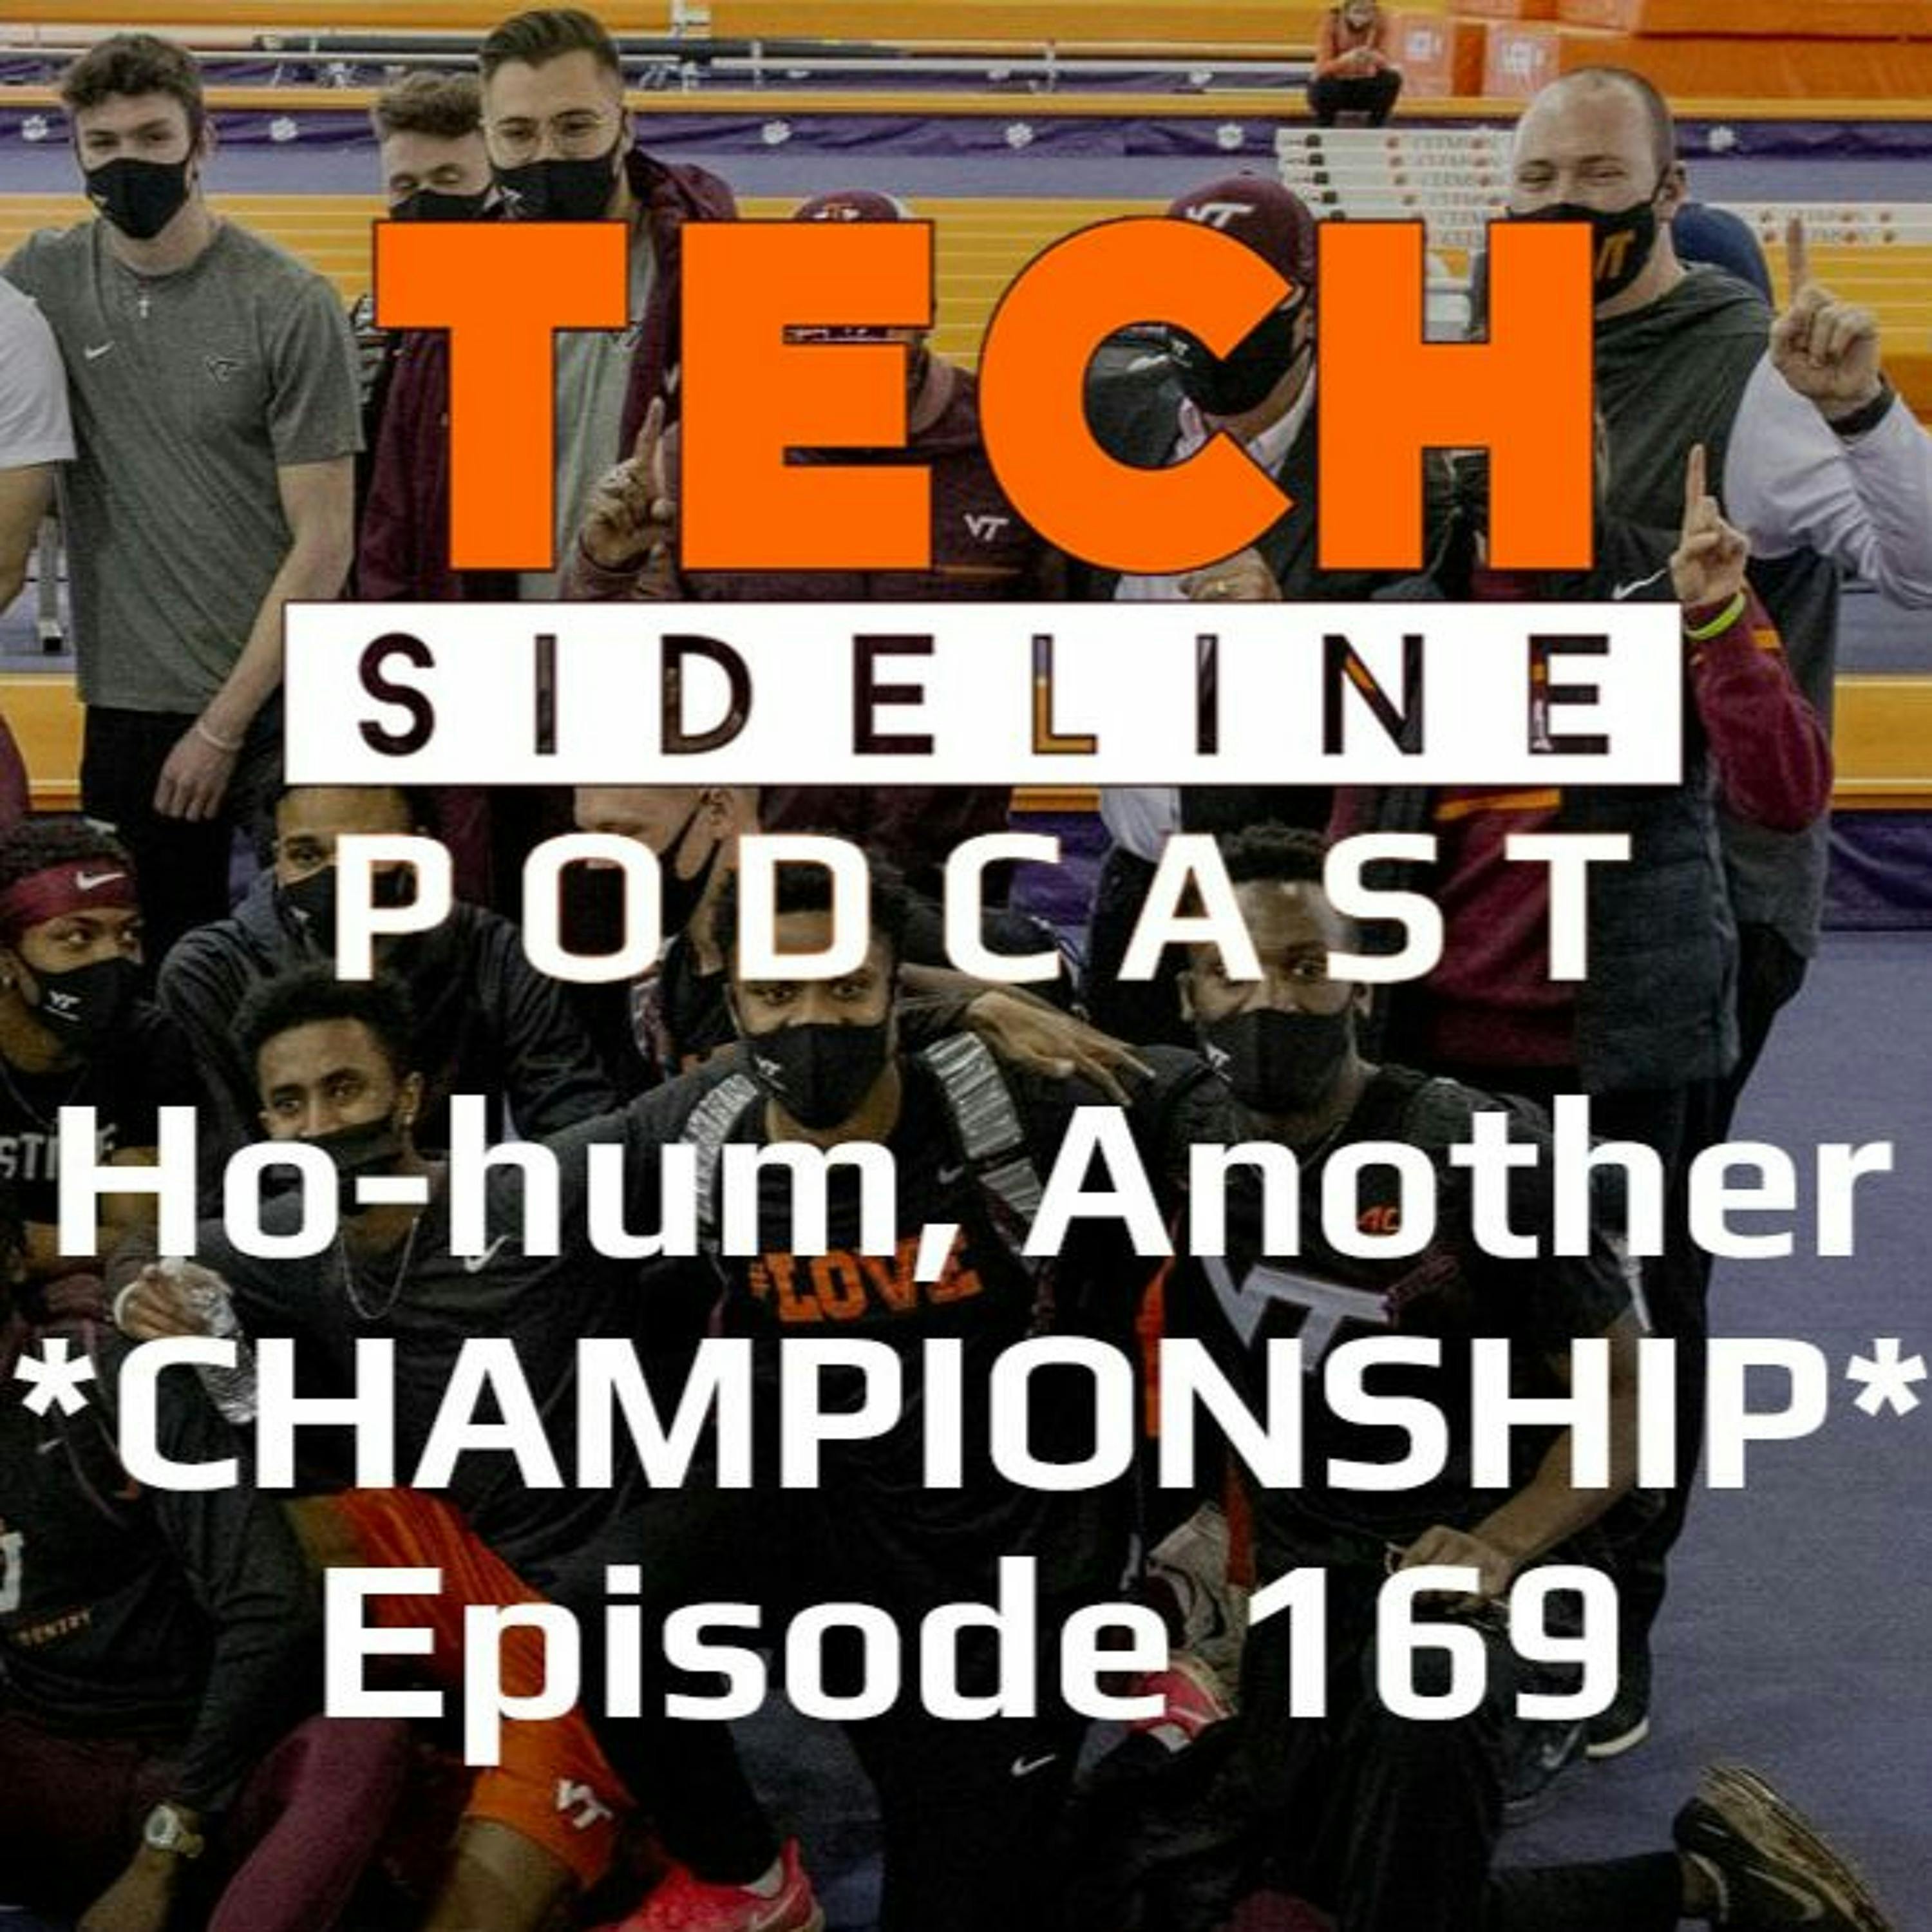 Ho-hum, Another Championship: Tech Sideline Podcast 169